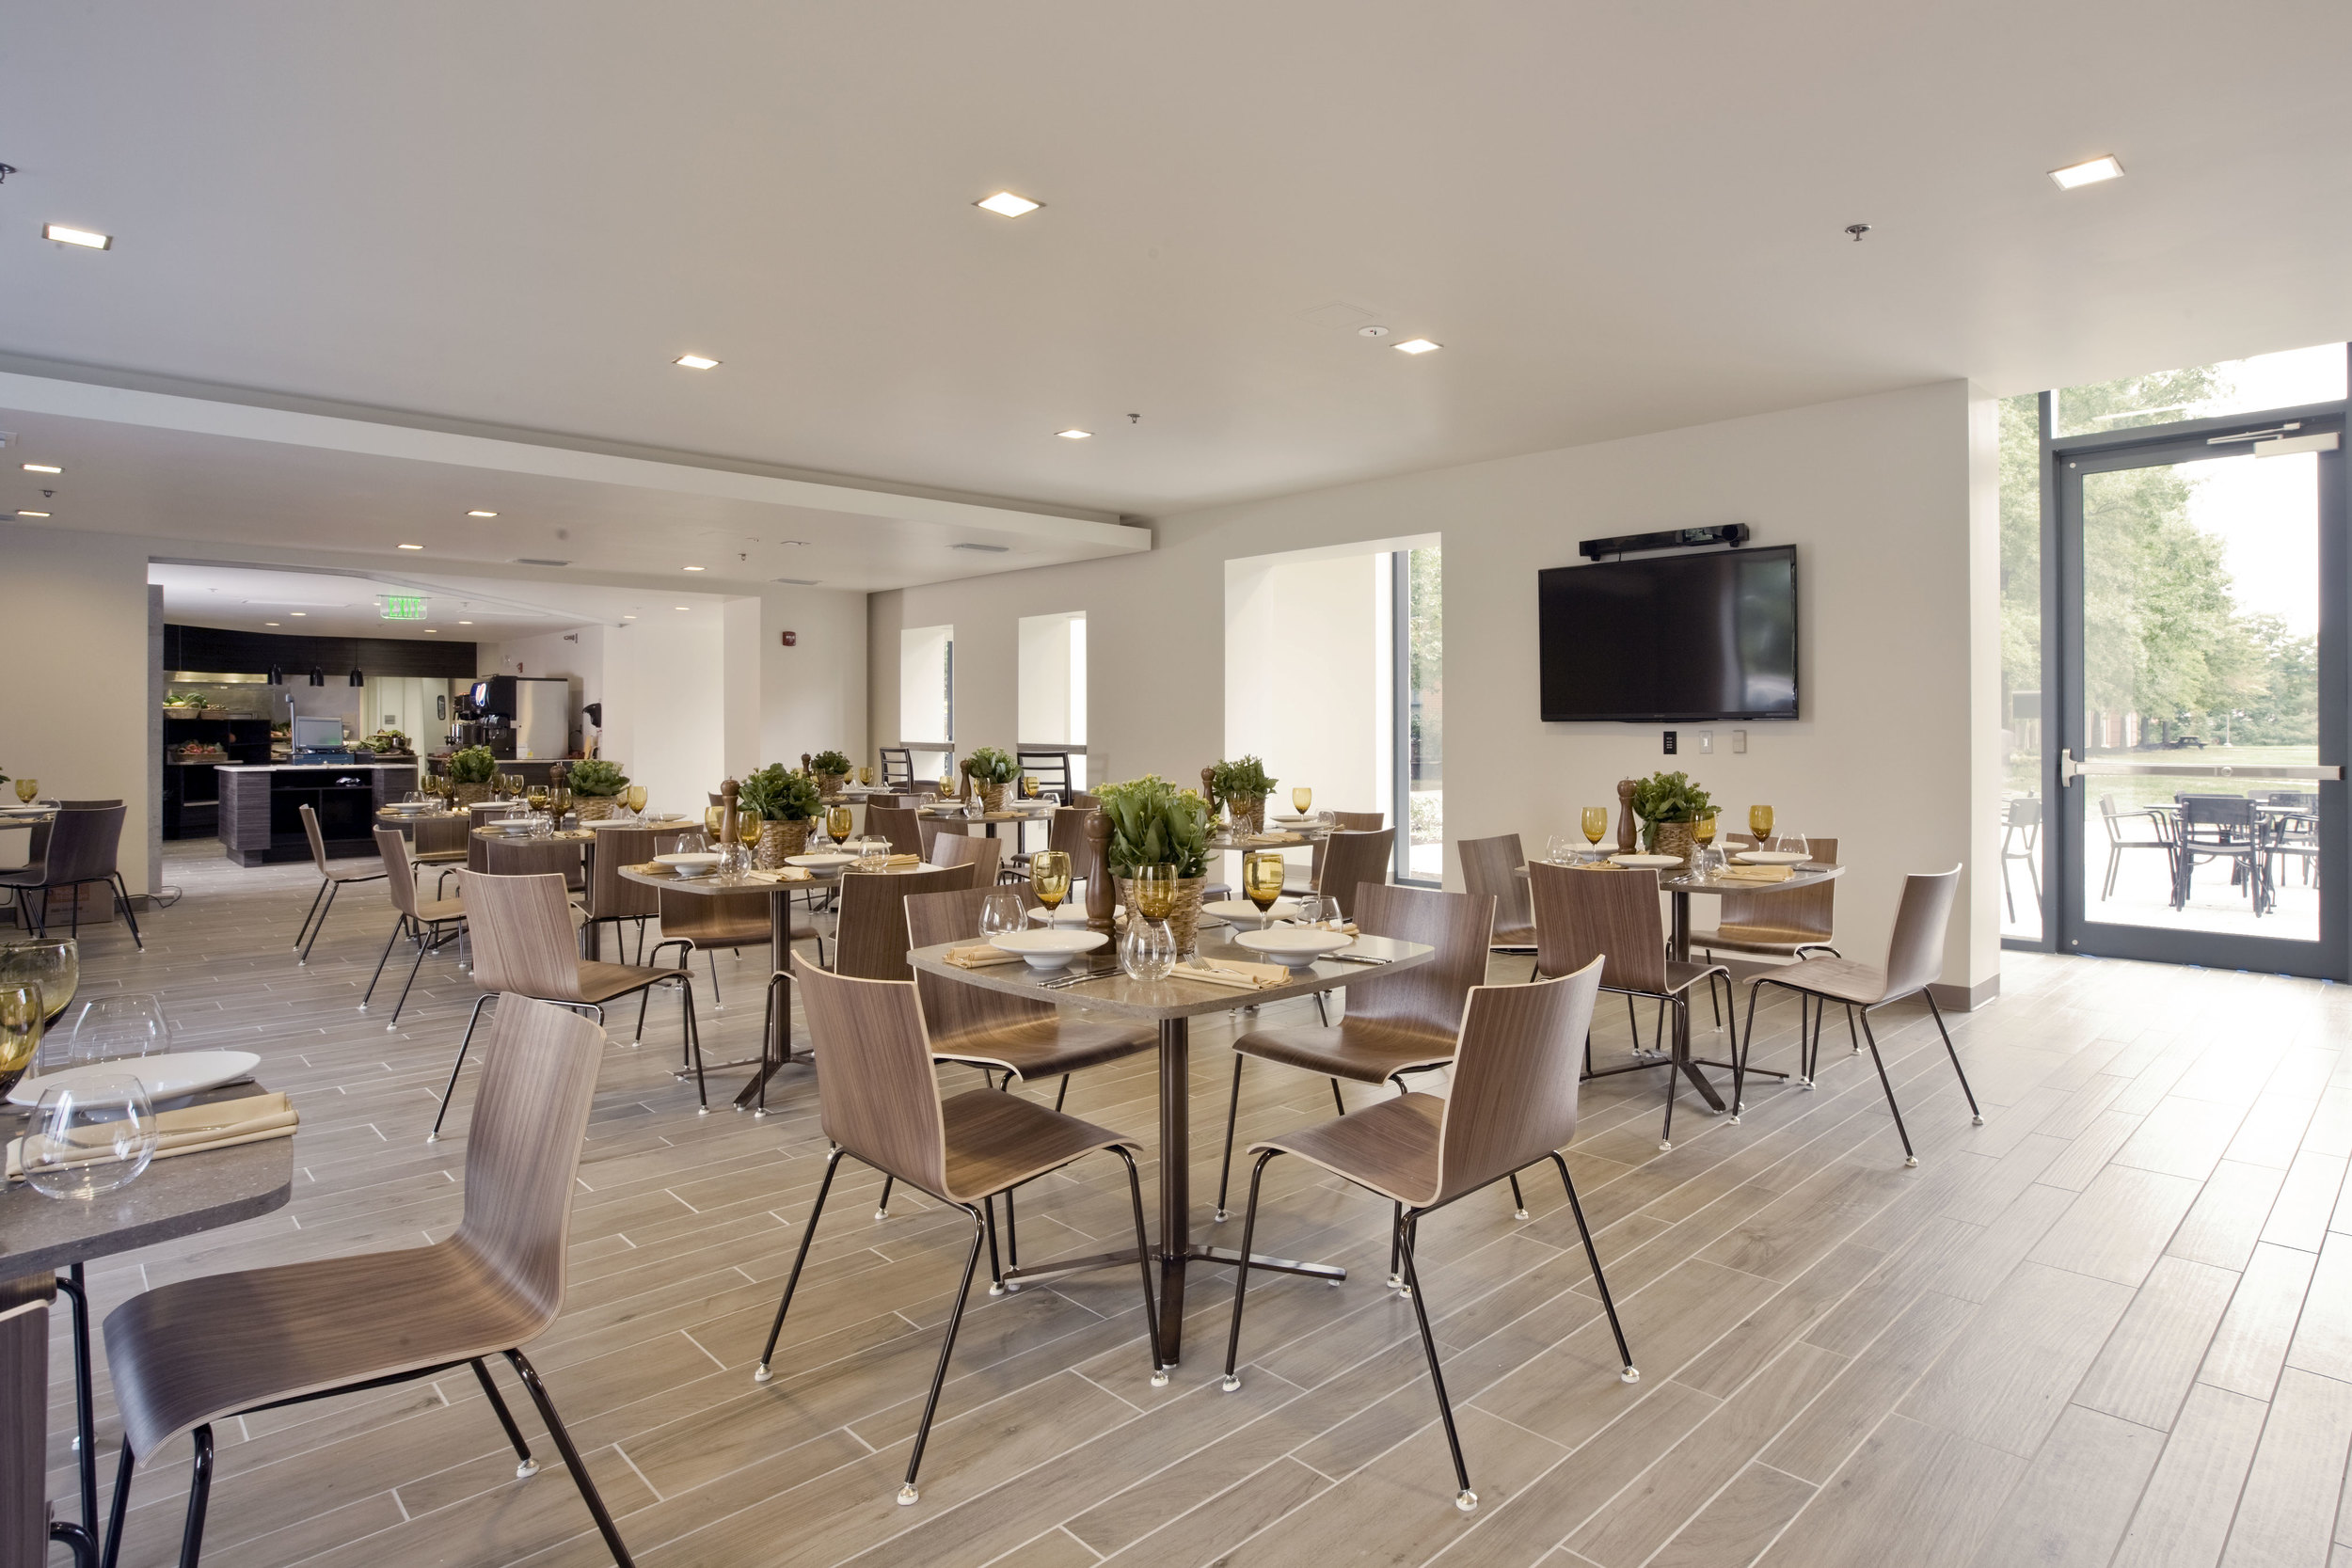 Dining Spaces for Corporate or Higher Education Environments